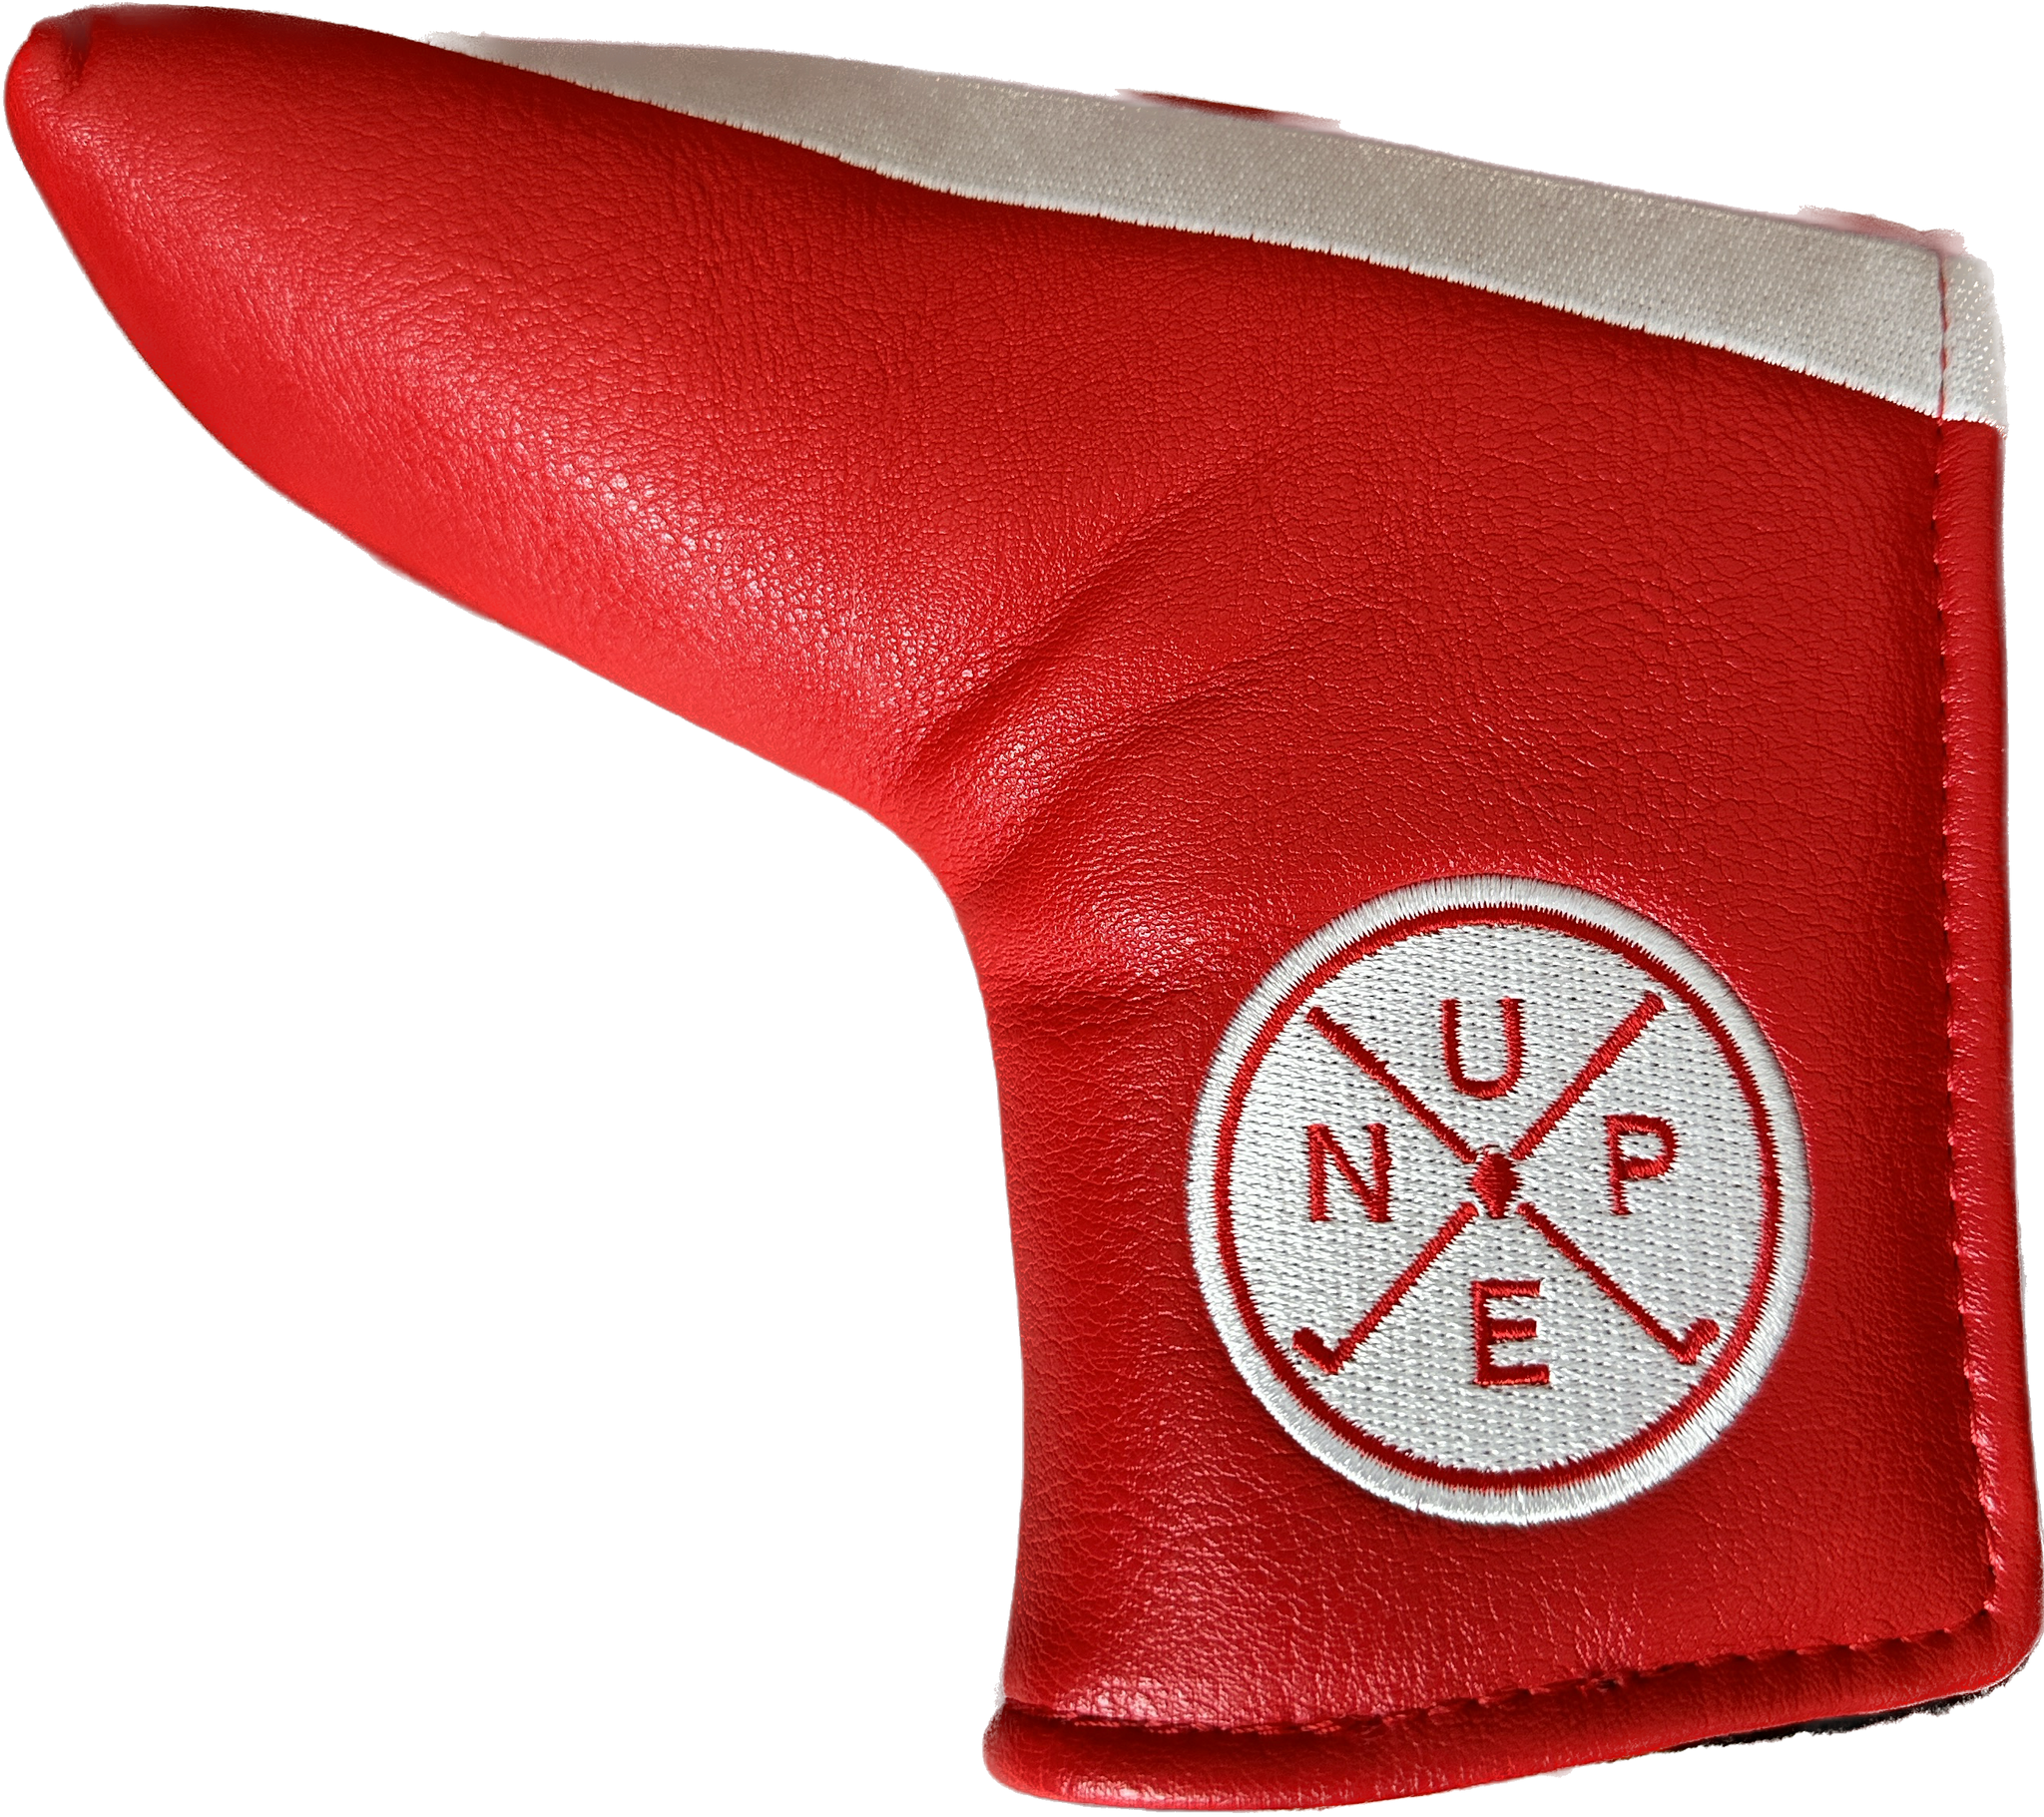 Nupe Cross Blade Putter Cover - iFoxx